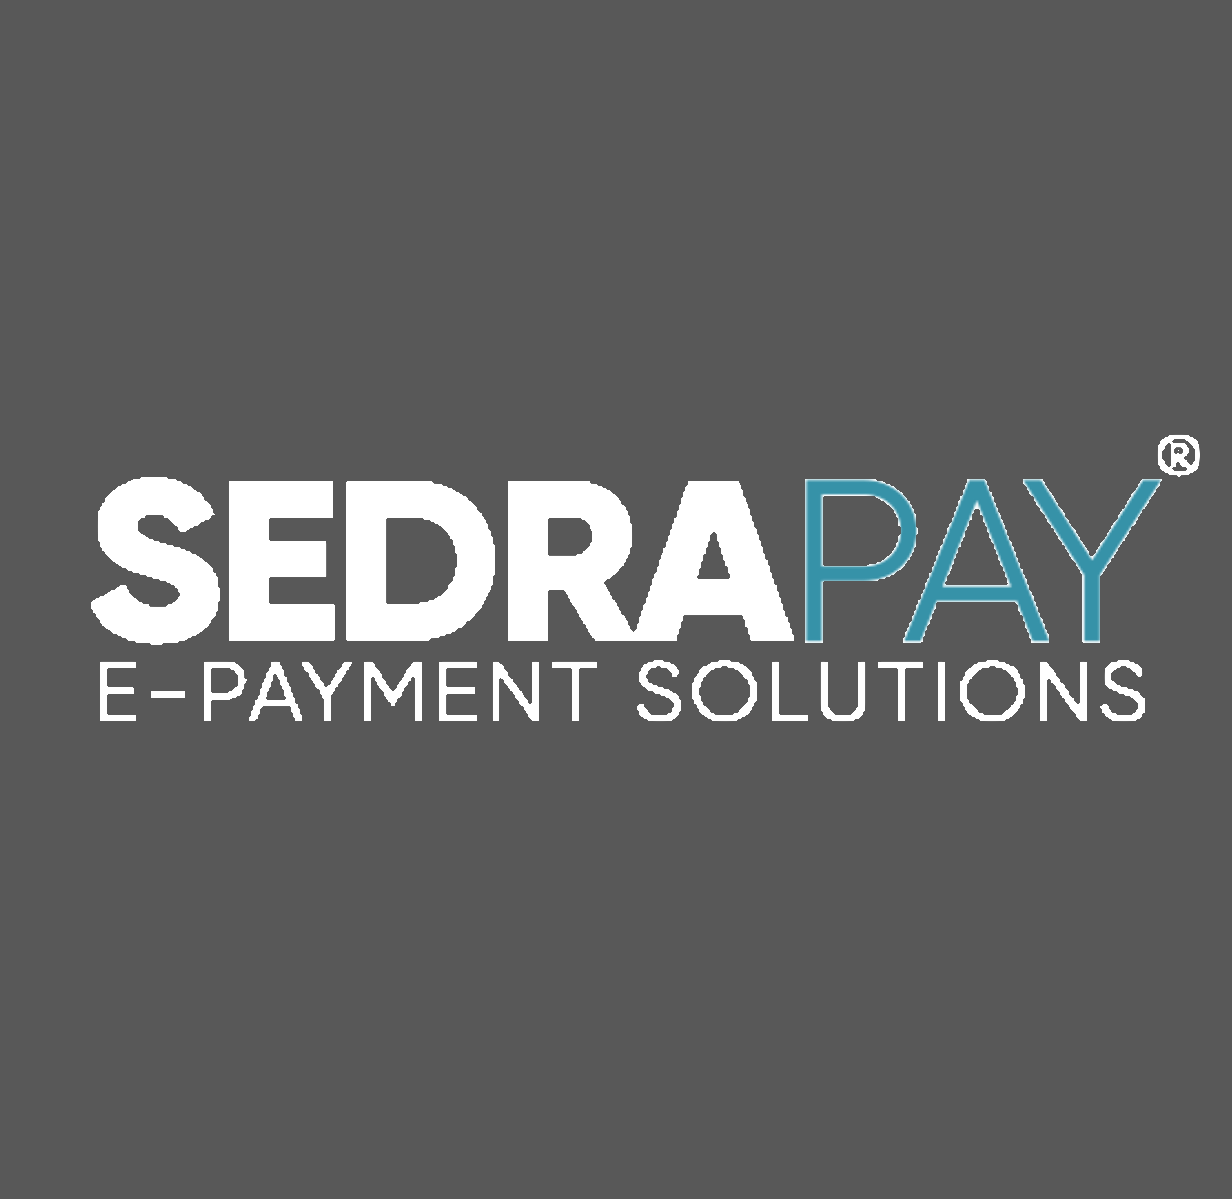 Sedra for E-payment solution company